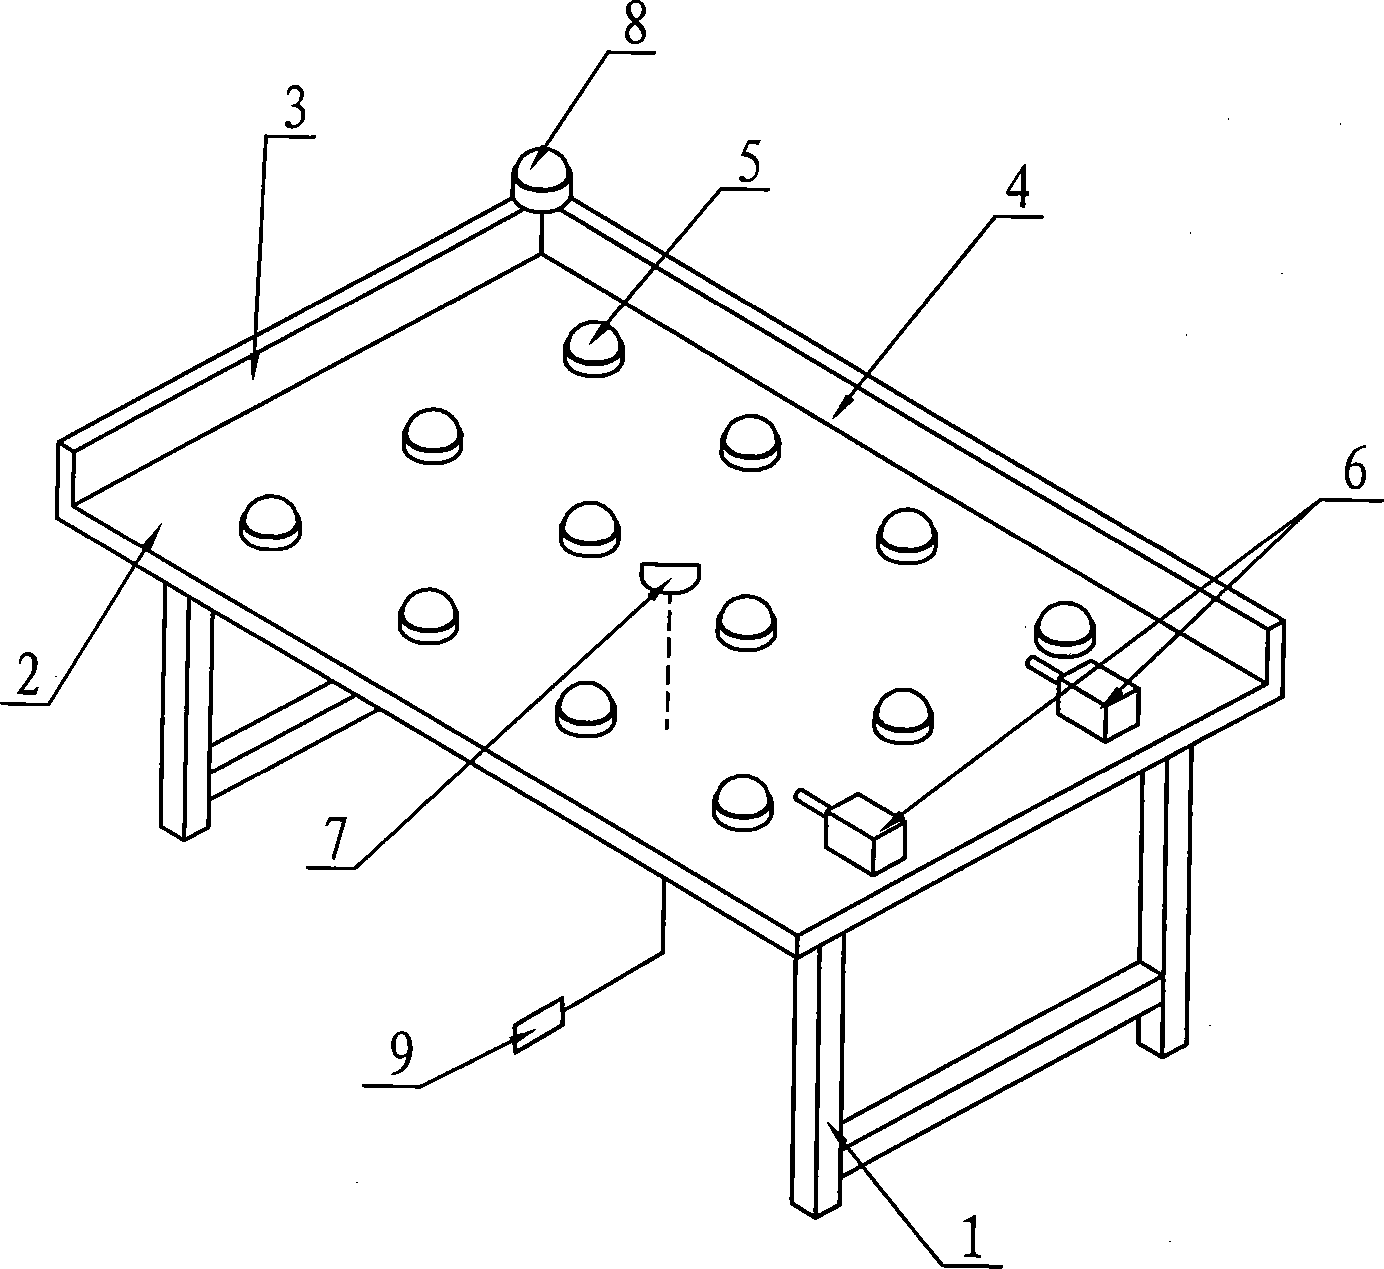 Overtemperature alarm device for solar energy component framing machine